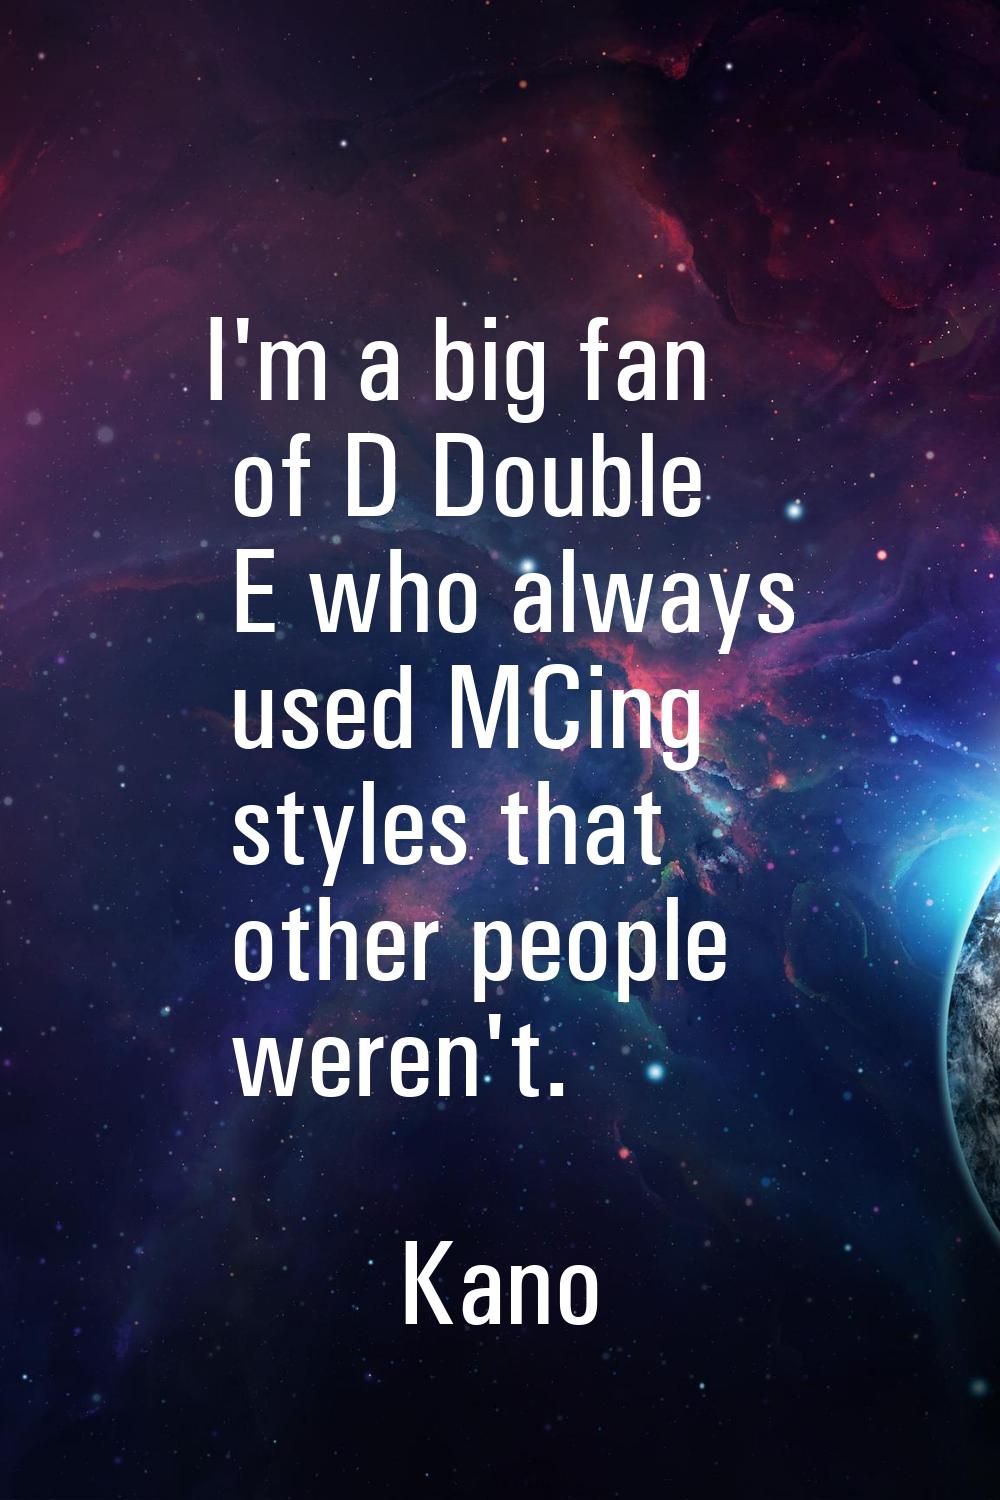 I'm a big fan of D Double E who always used MCing styles that other people weren't.